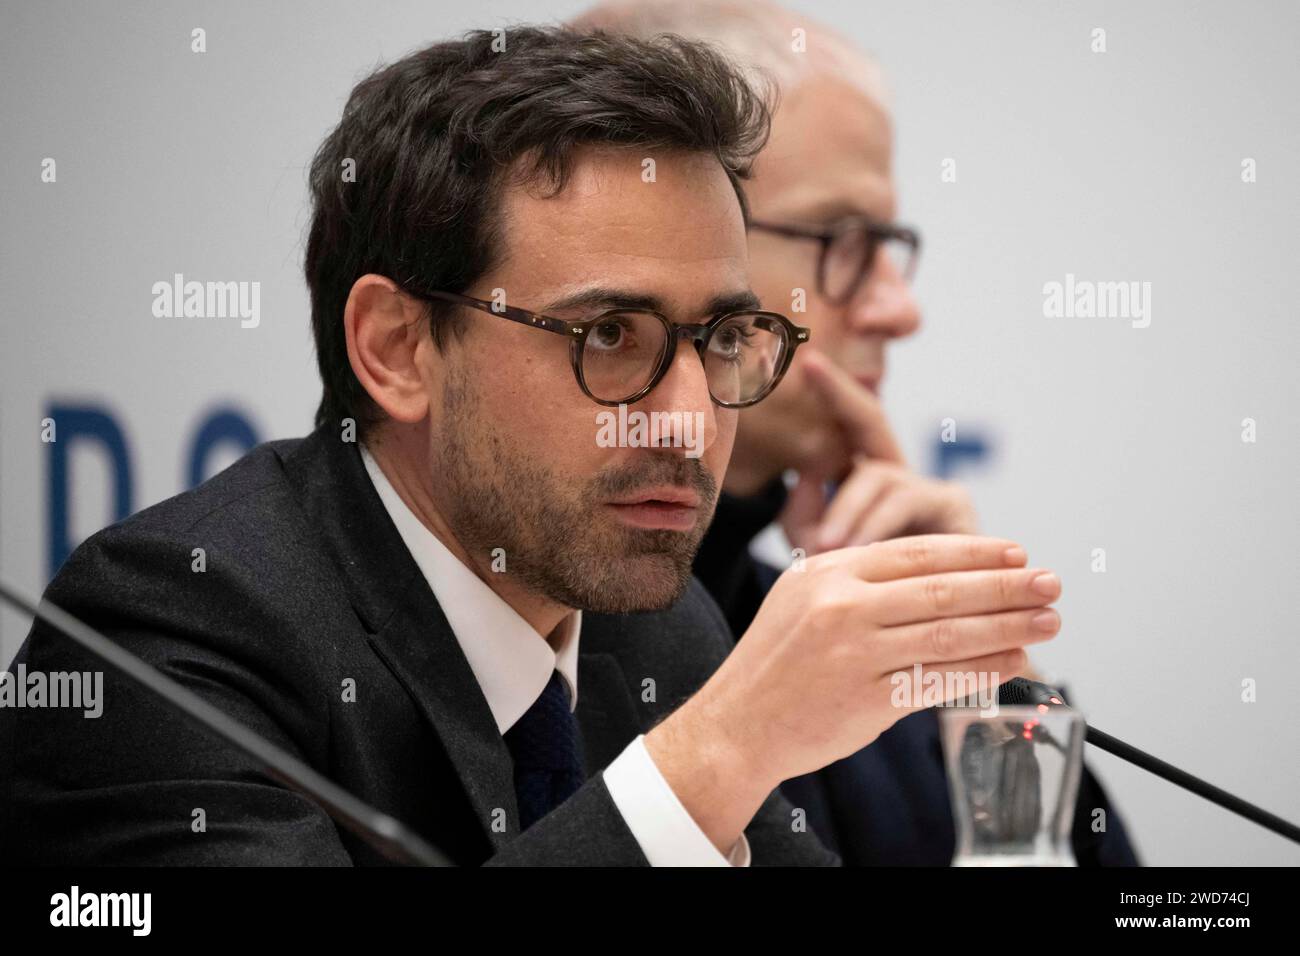 Paris France 18th Jan 2024 French Foreign And European Affairs Minister Stephane Sejourne During The Renaissance Partys Executive Office In Paris On January 18 2024photo By Eliot Blondetabacapresscom Credit Abaca Pressalamy Live News 2WD74CJ 